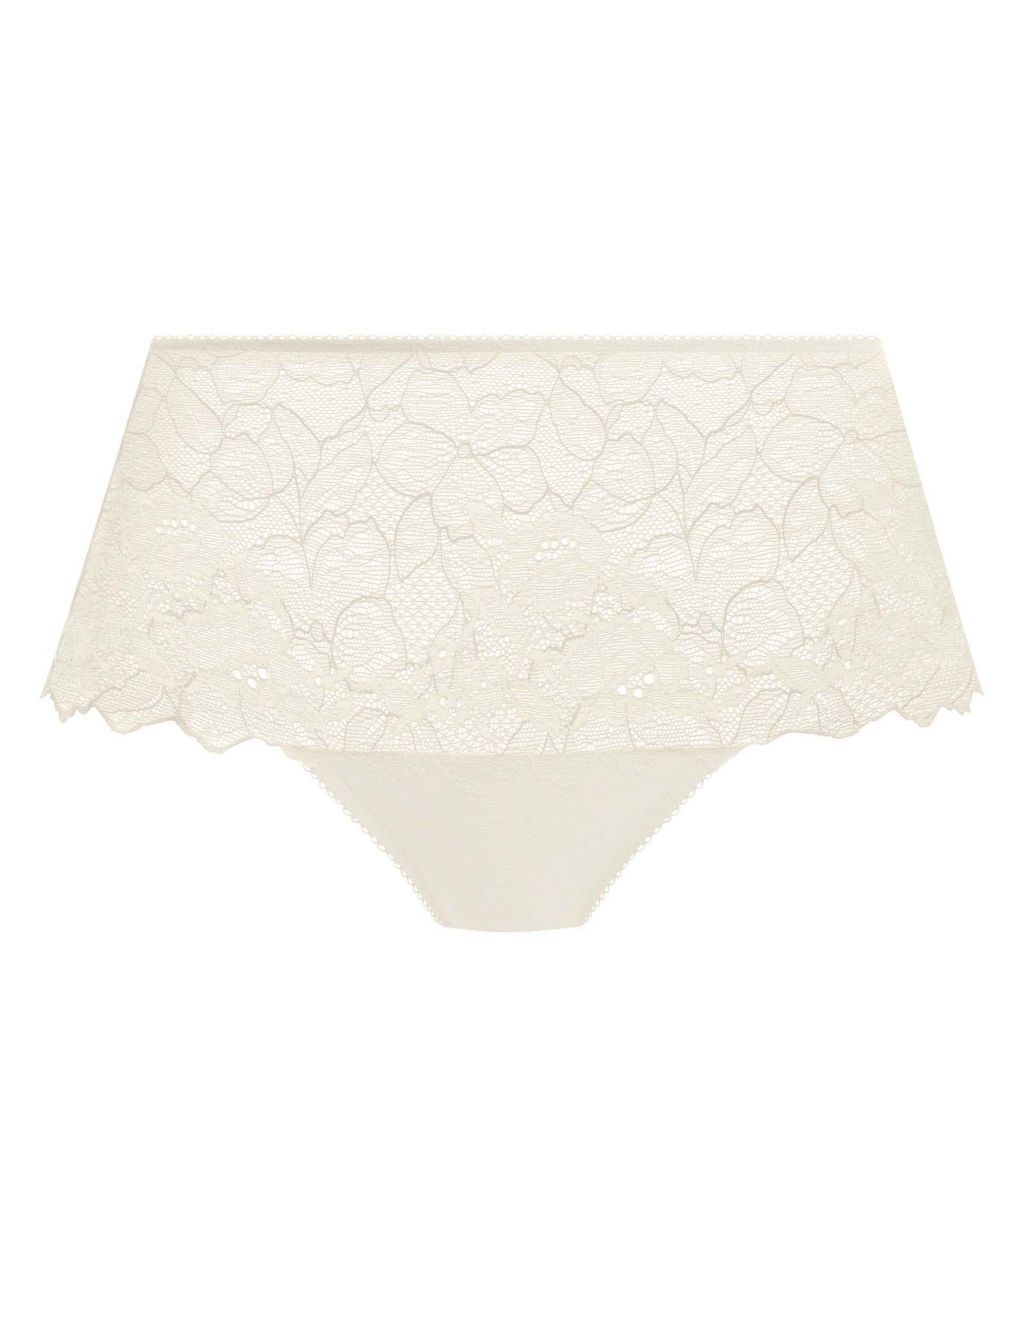 Lace Perfection Low Rise Shorts image 2